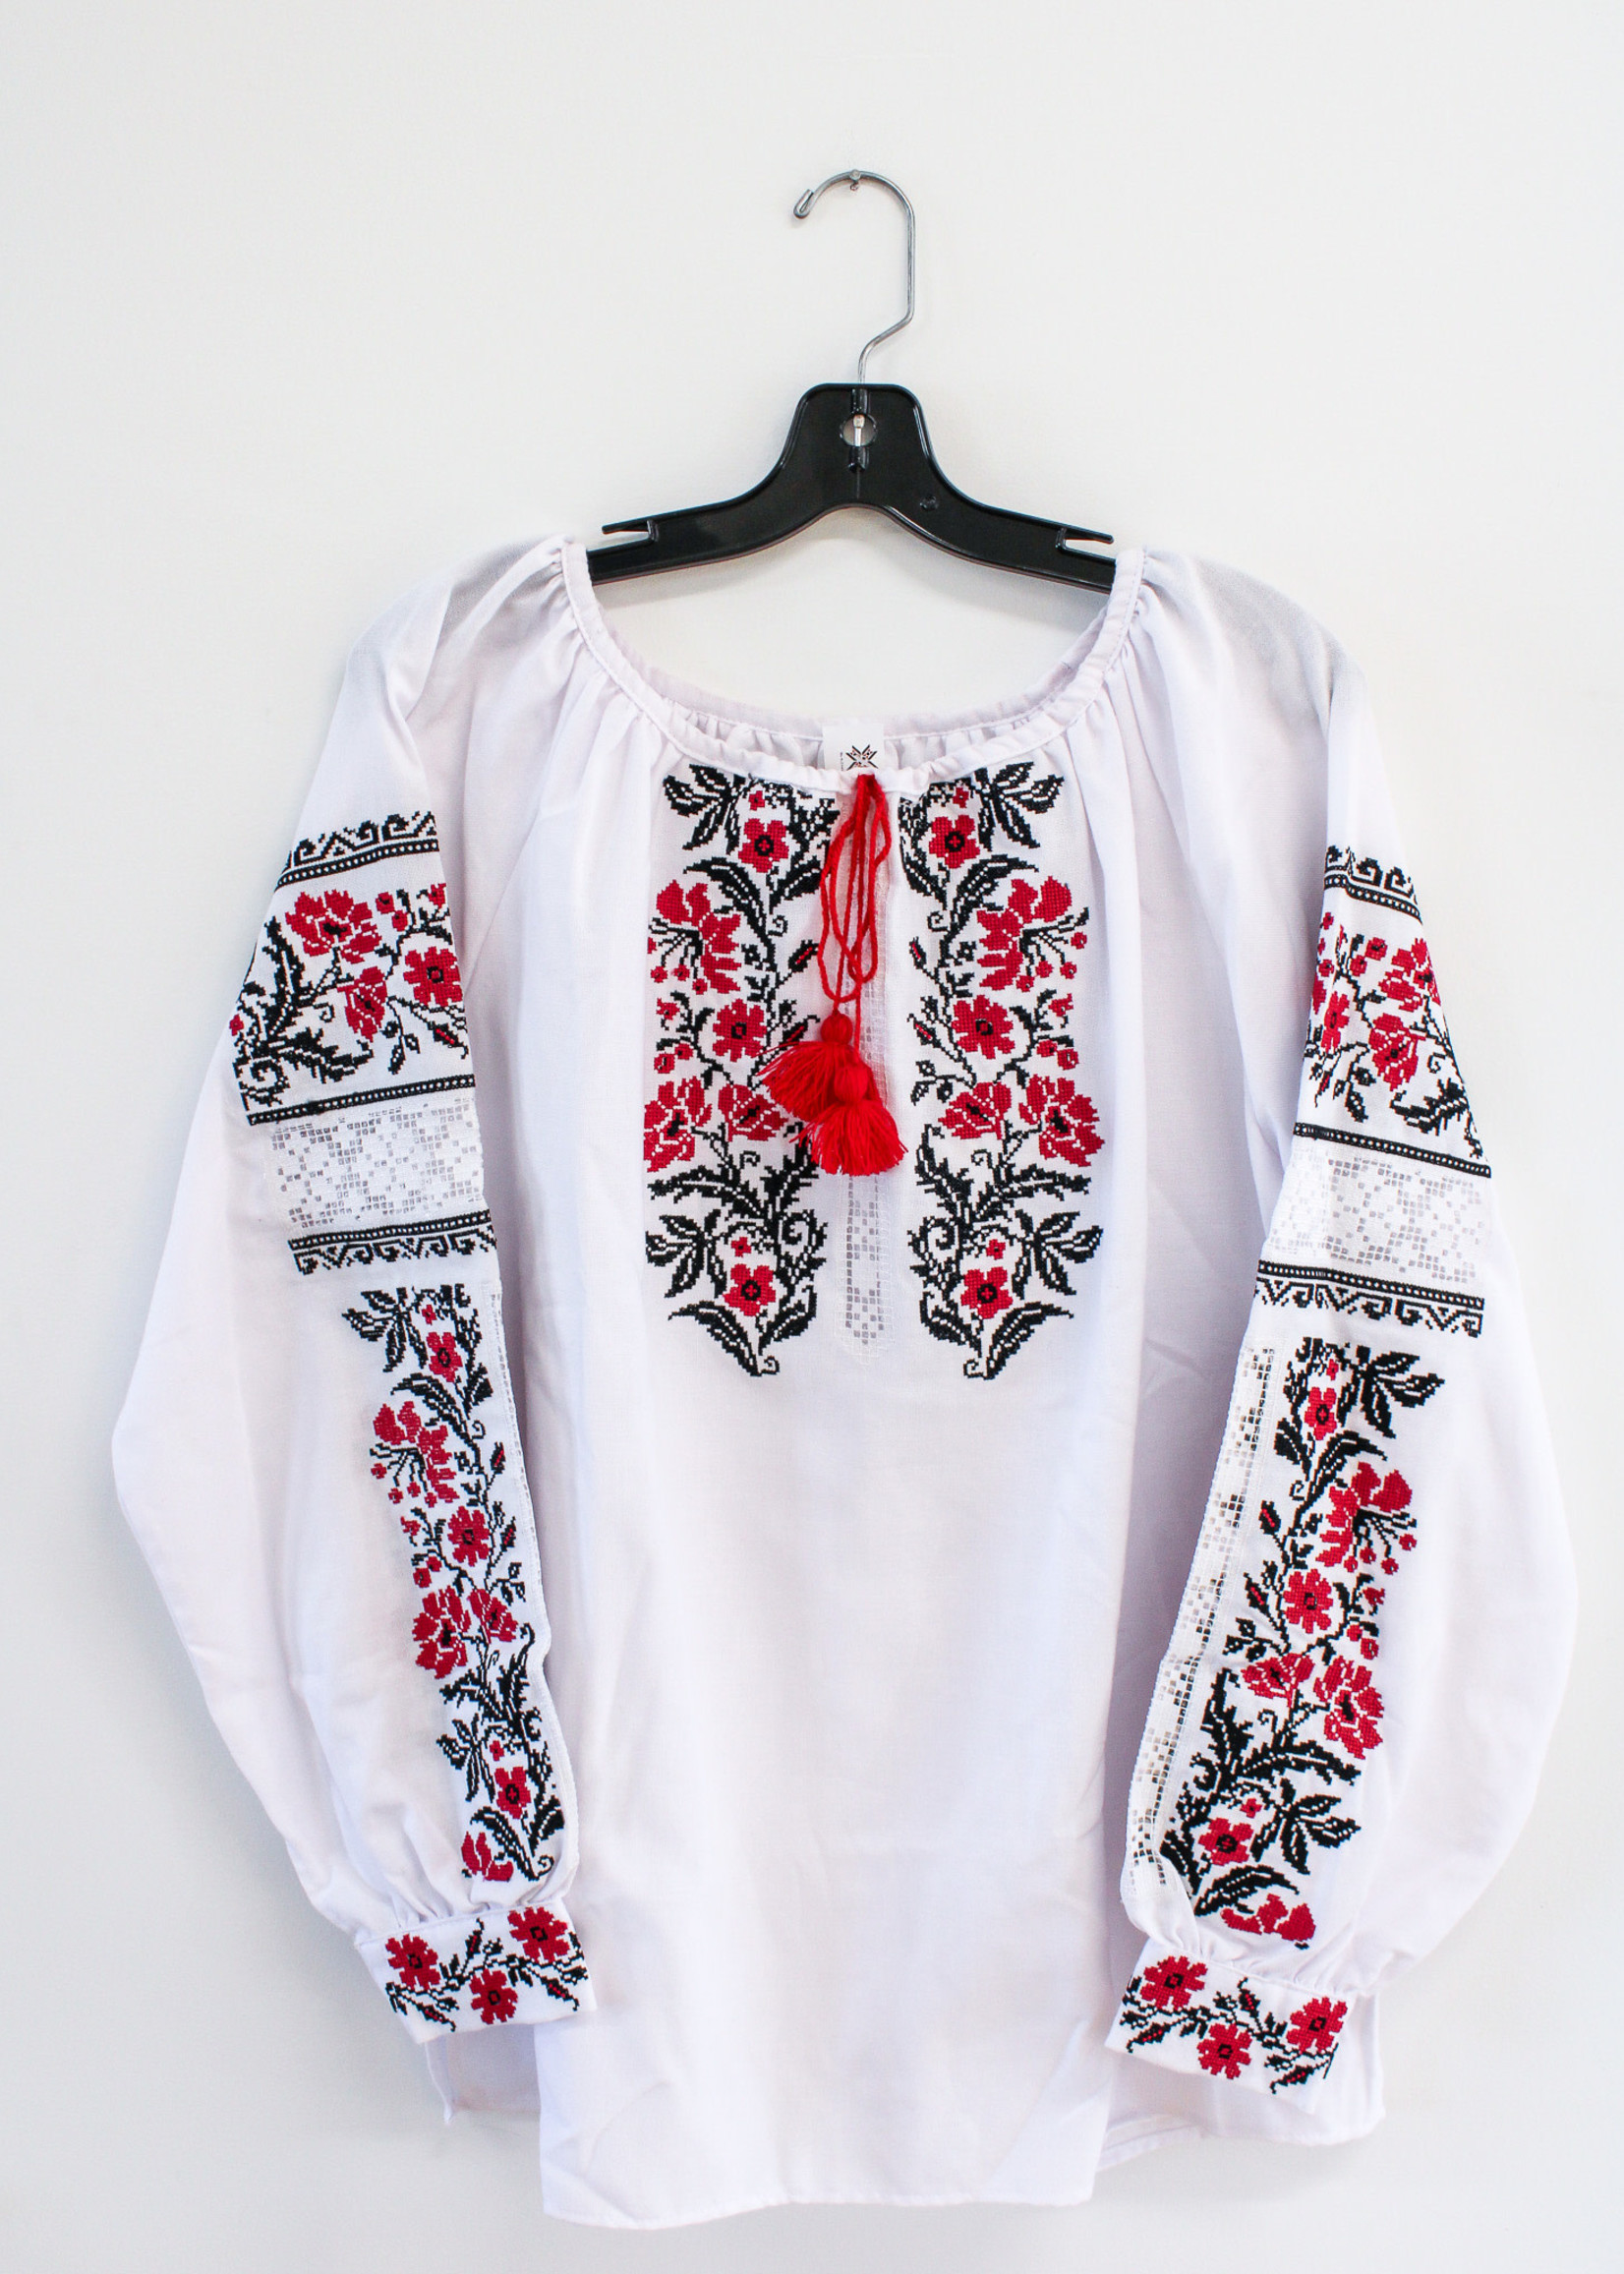 APPAREL - (W)Vyshyvanka White Lace/Red/Black Floral Embroidery + Embroidered Sleeves with tassel